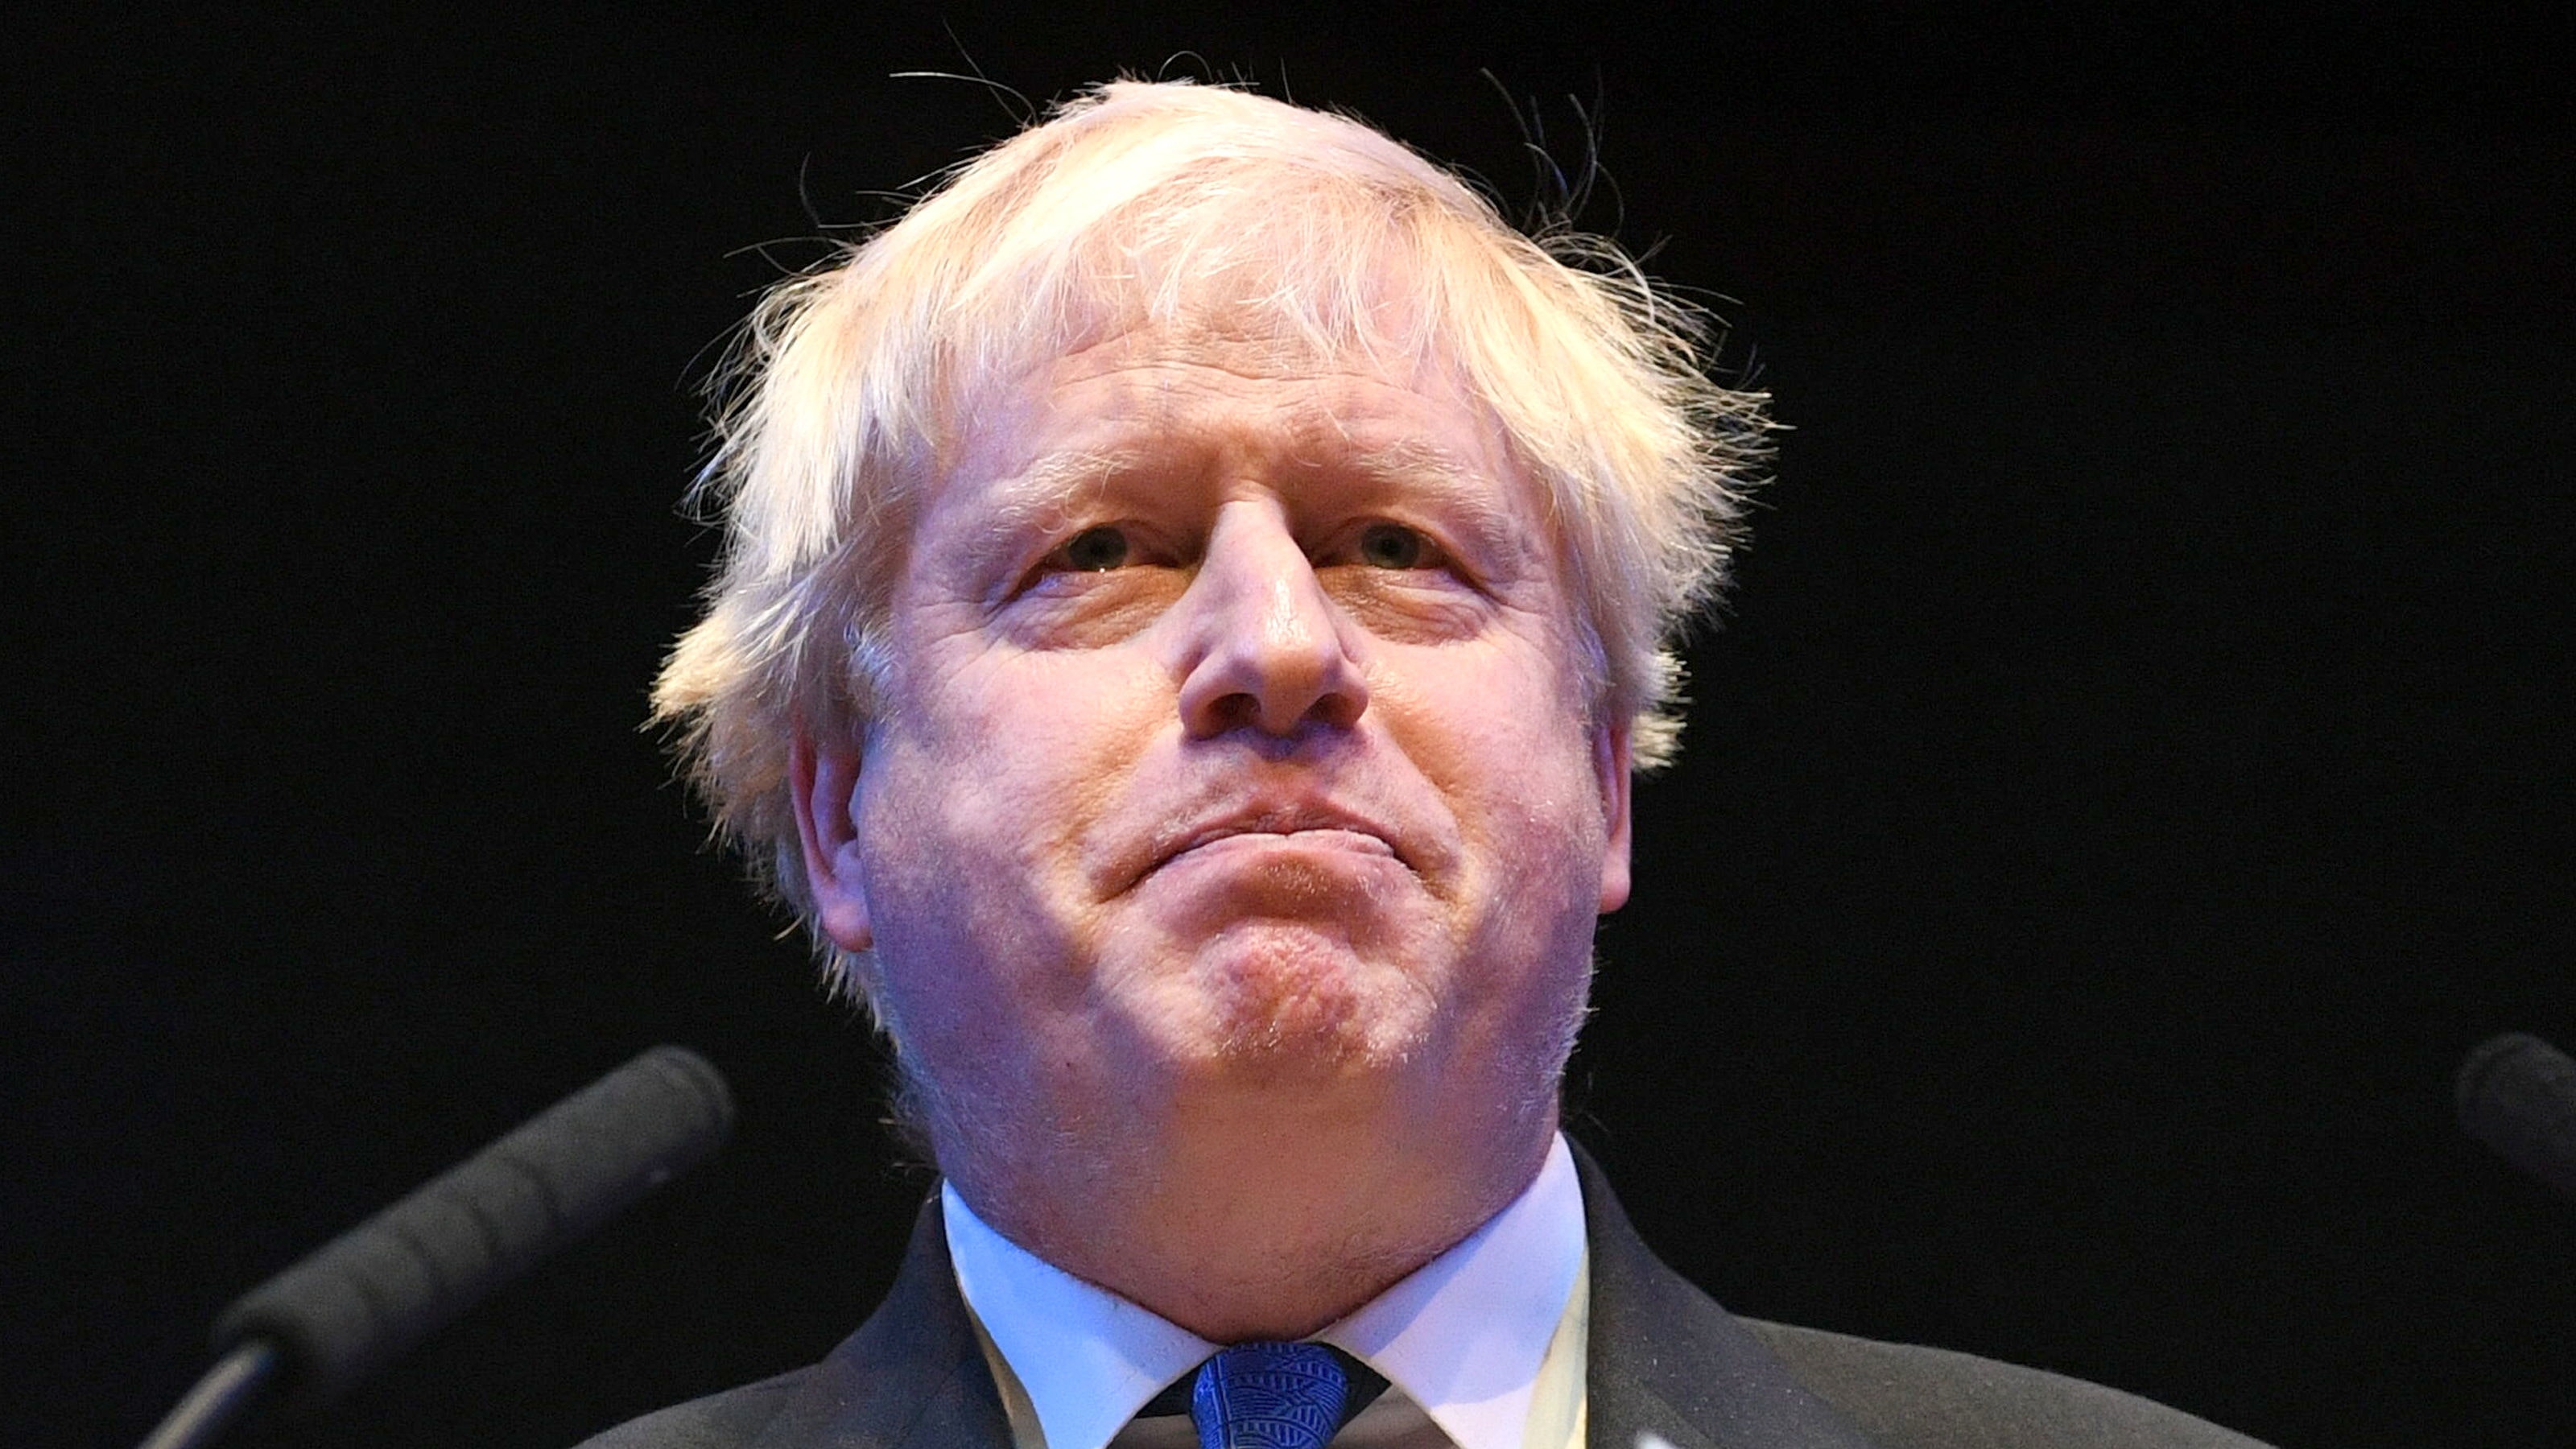 Brexit deal like terms imposed after military defeat, says Boris Johnson | BT